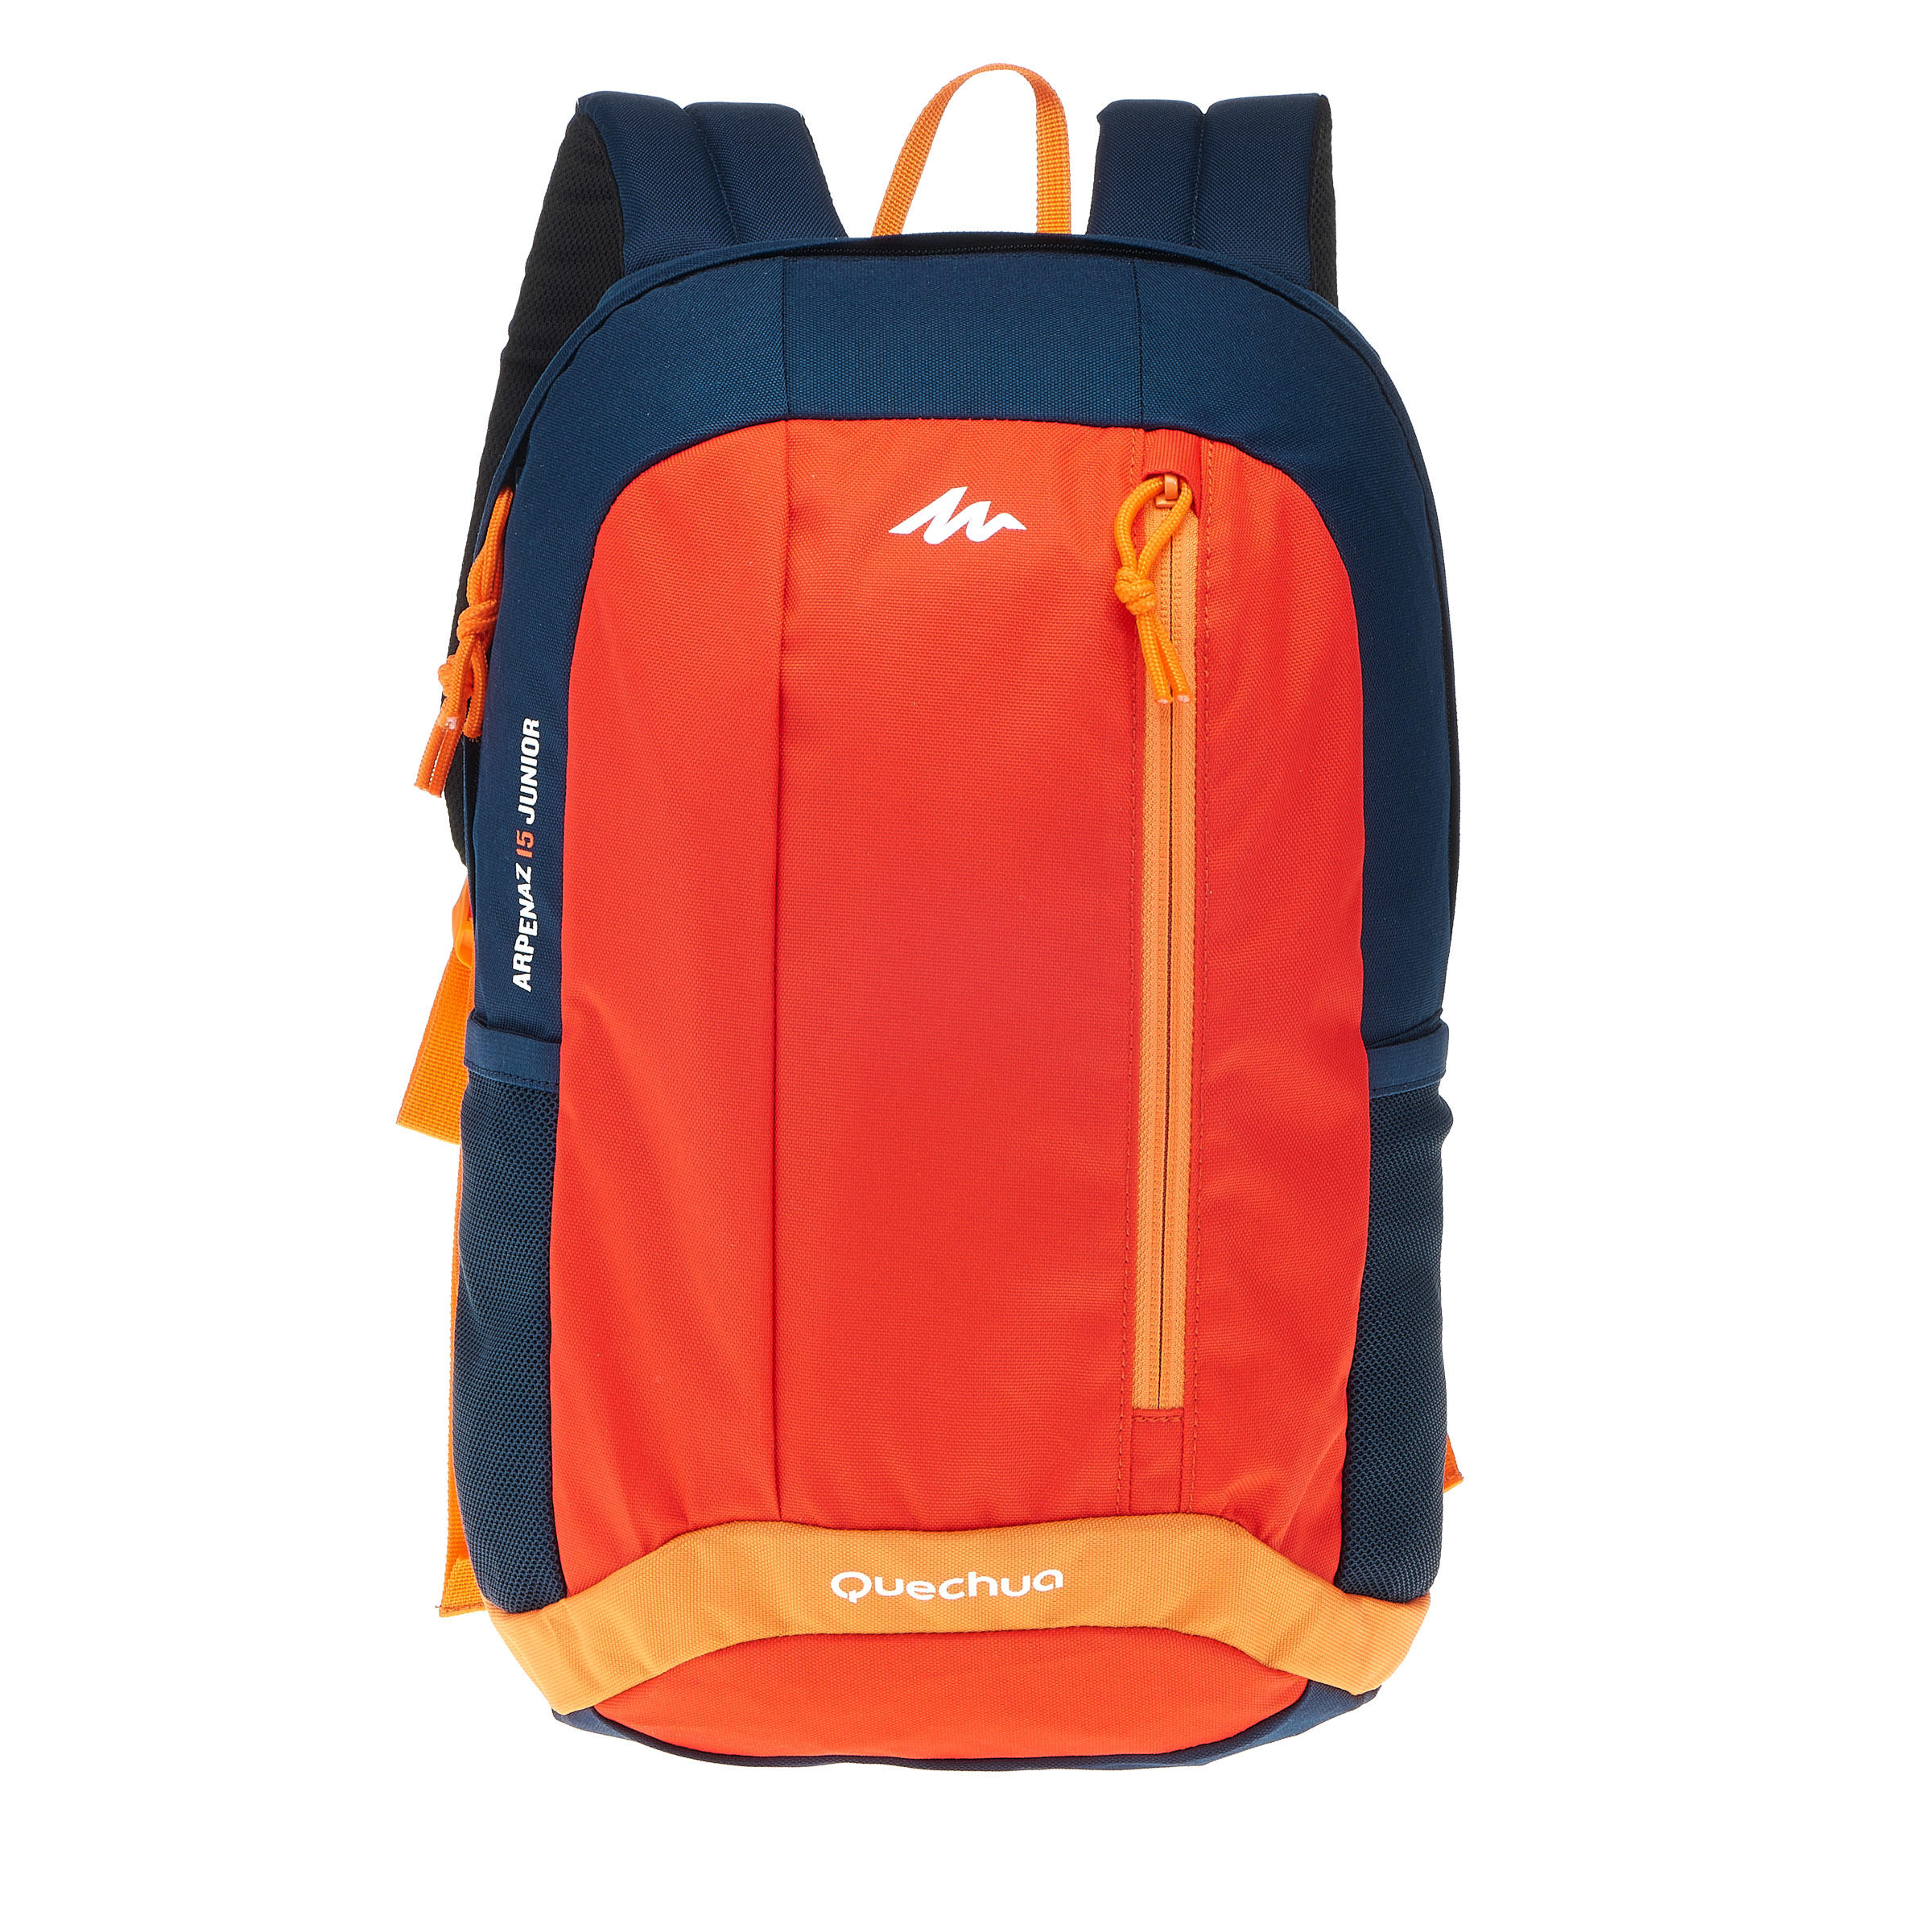 Kids Hiking Backpack MH500 15 Litres - Red 6/15